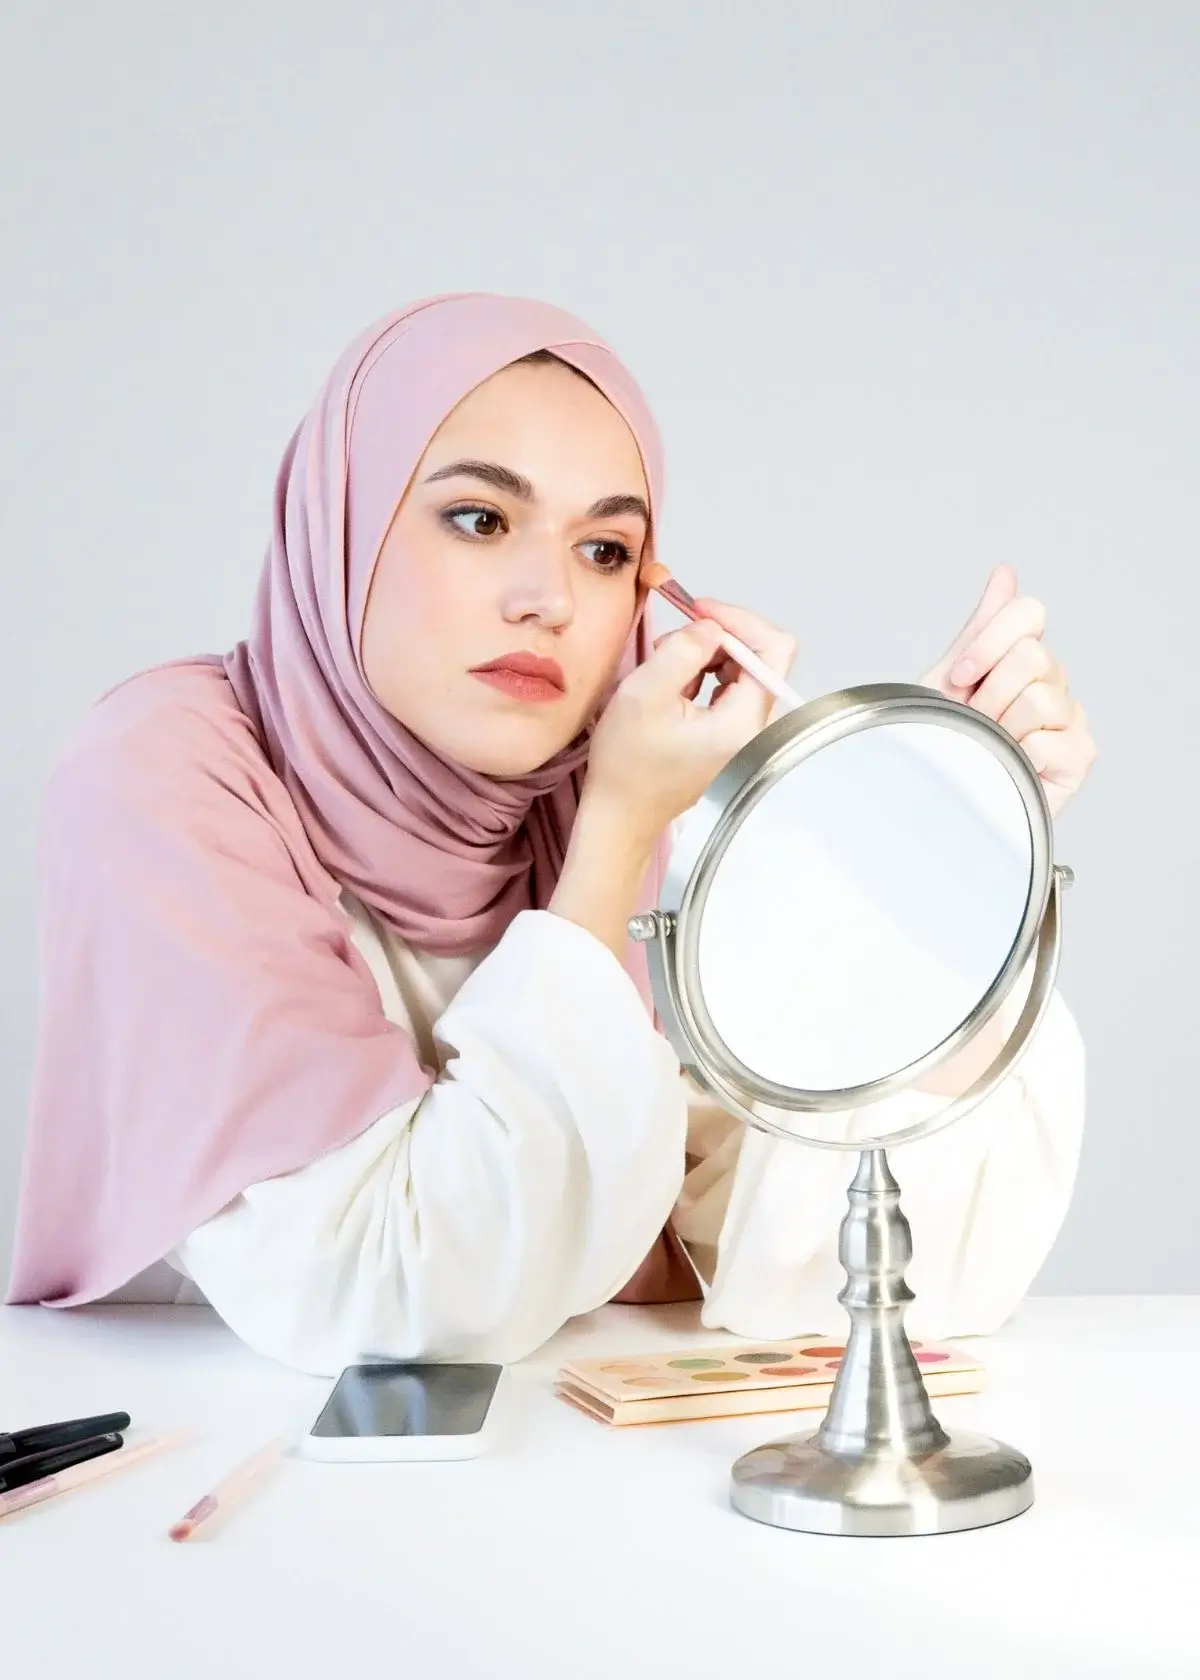 How to choose the right lighted makeup mirror?